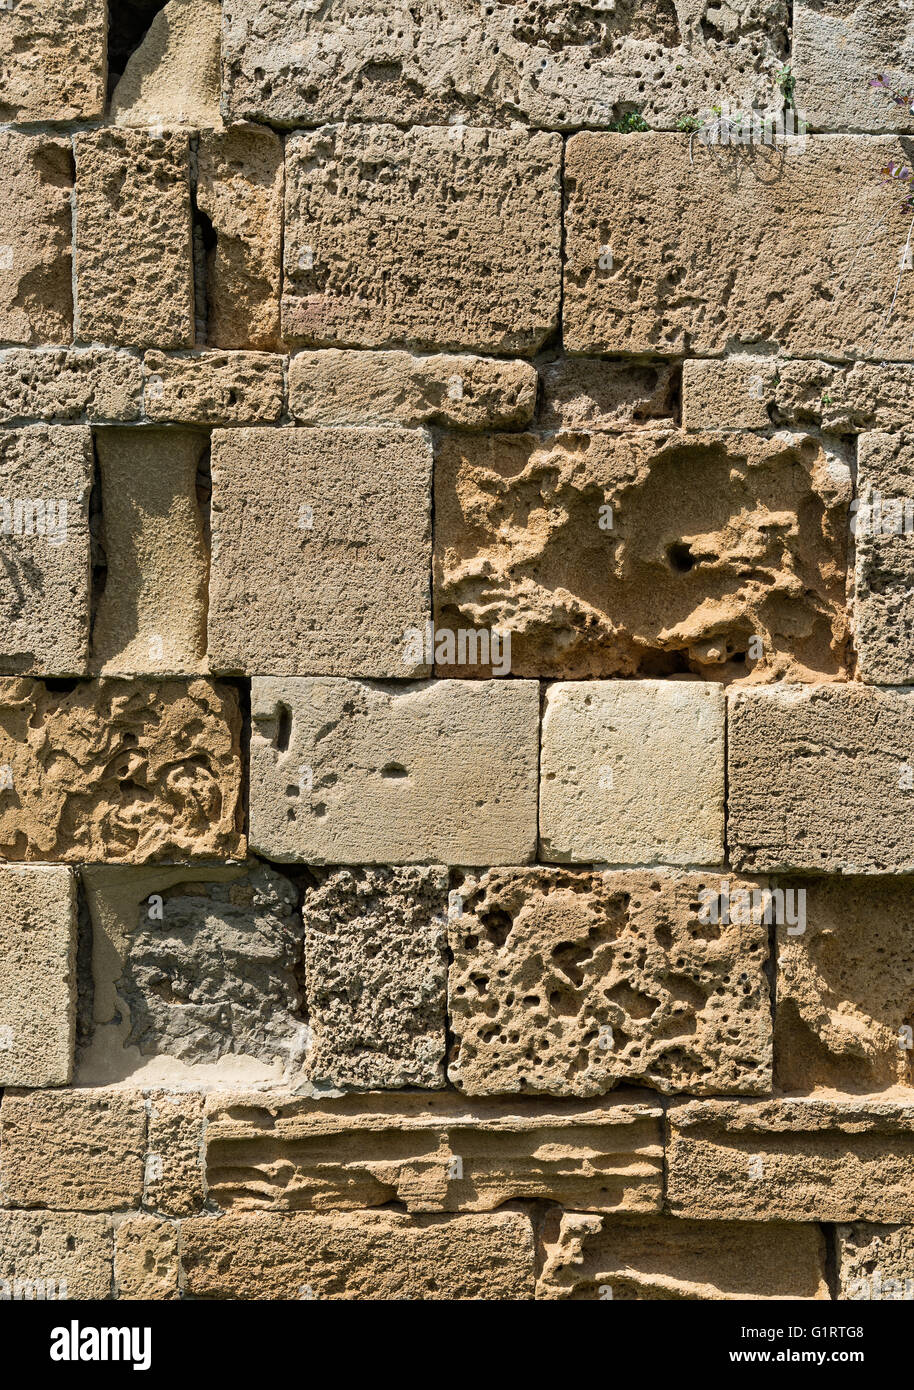 Old wall of hewn stone, Piazza del Duomo, Piazza dei Miracoli, Province of Pisa, Tuscany, Italy Stock Photo